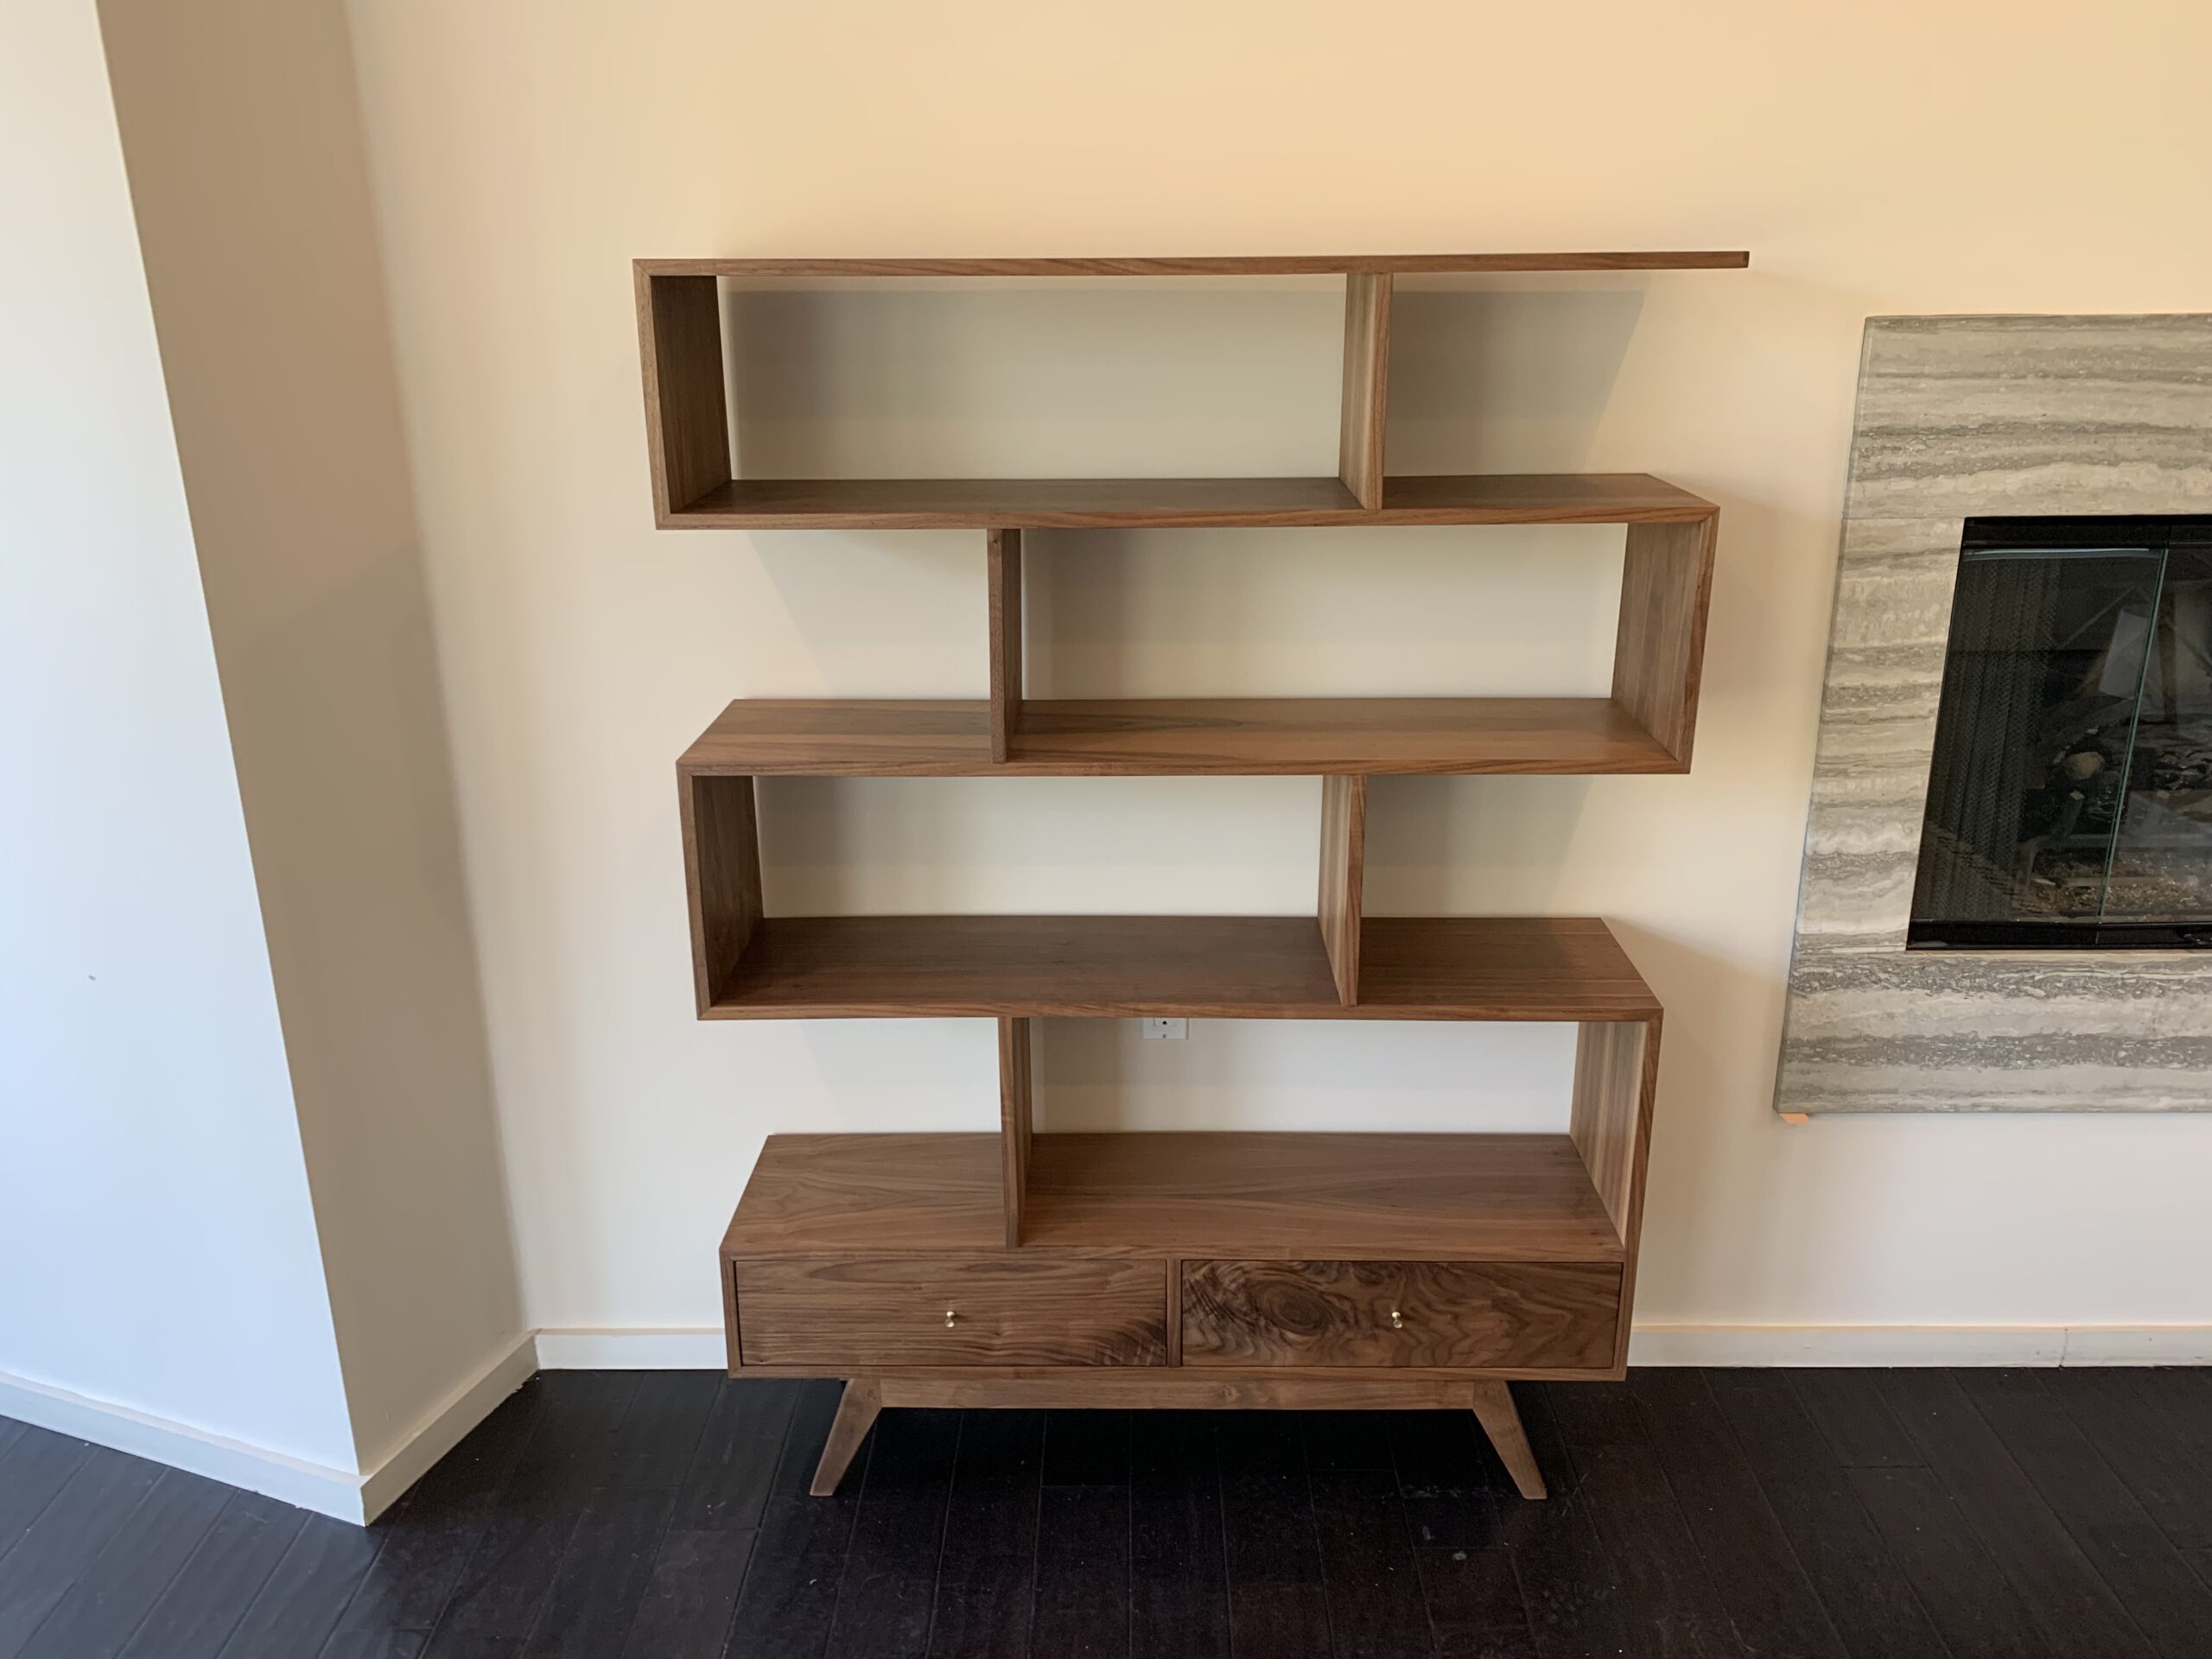 48" Hand Crafted "Staggered" Display Bookshelf